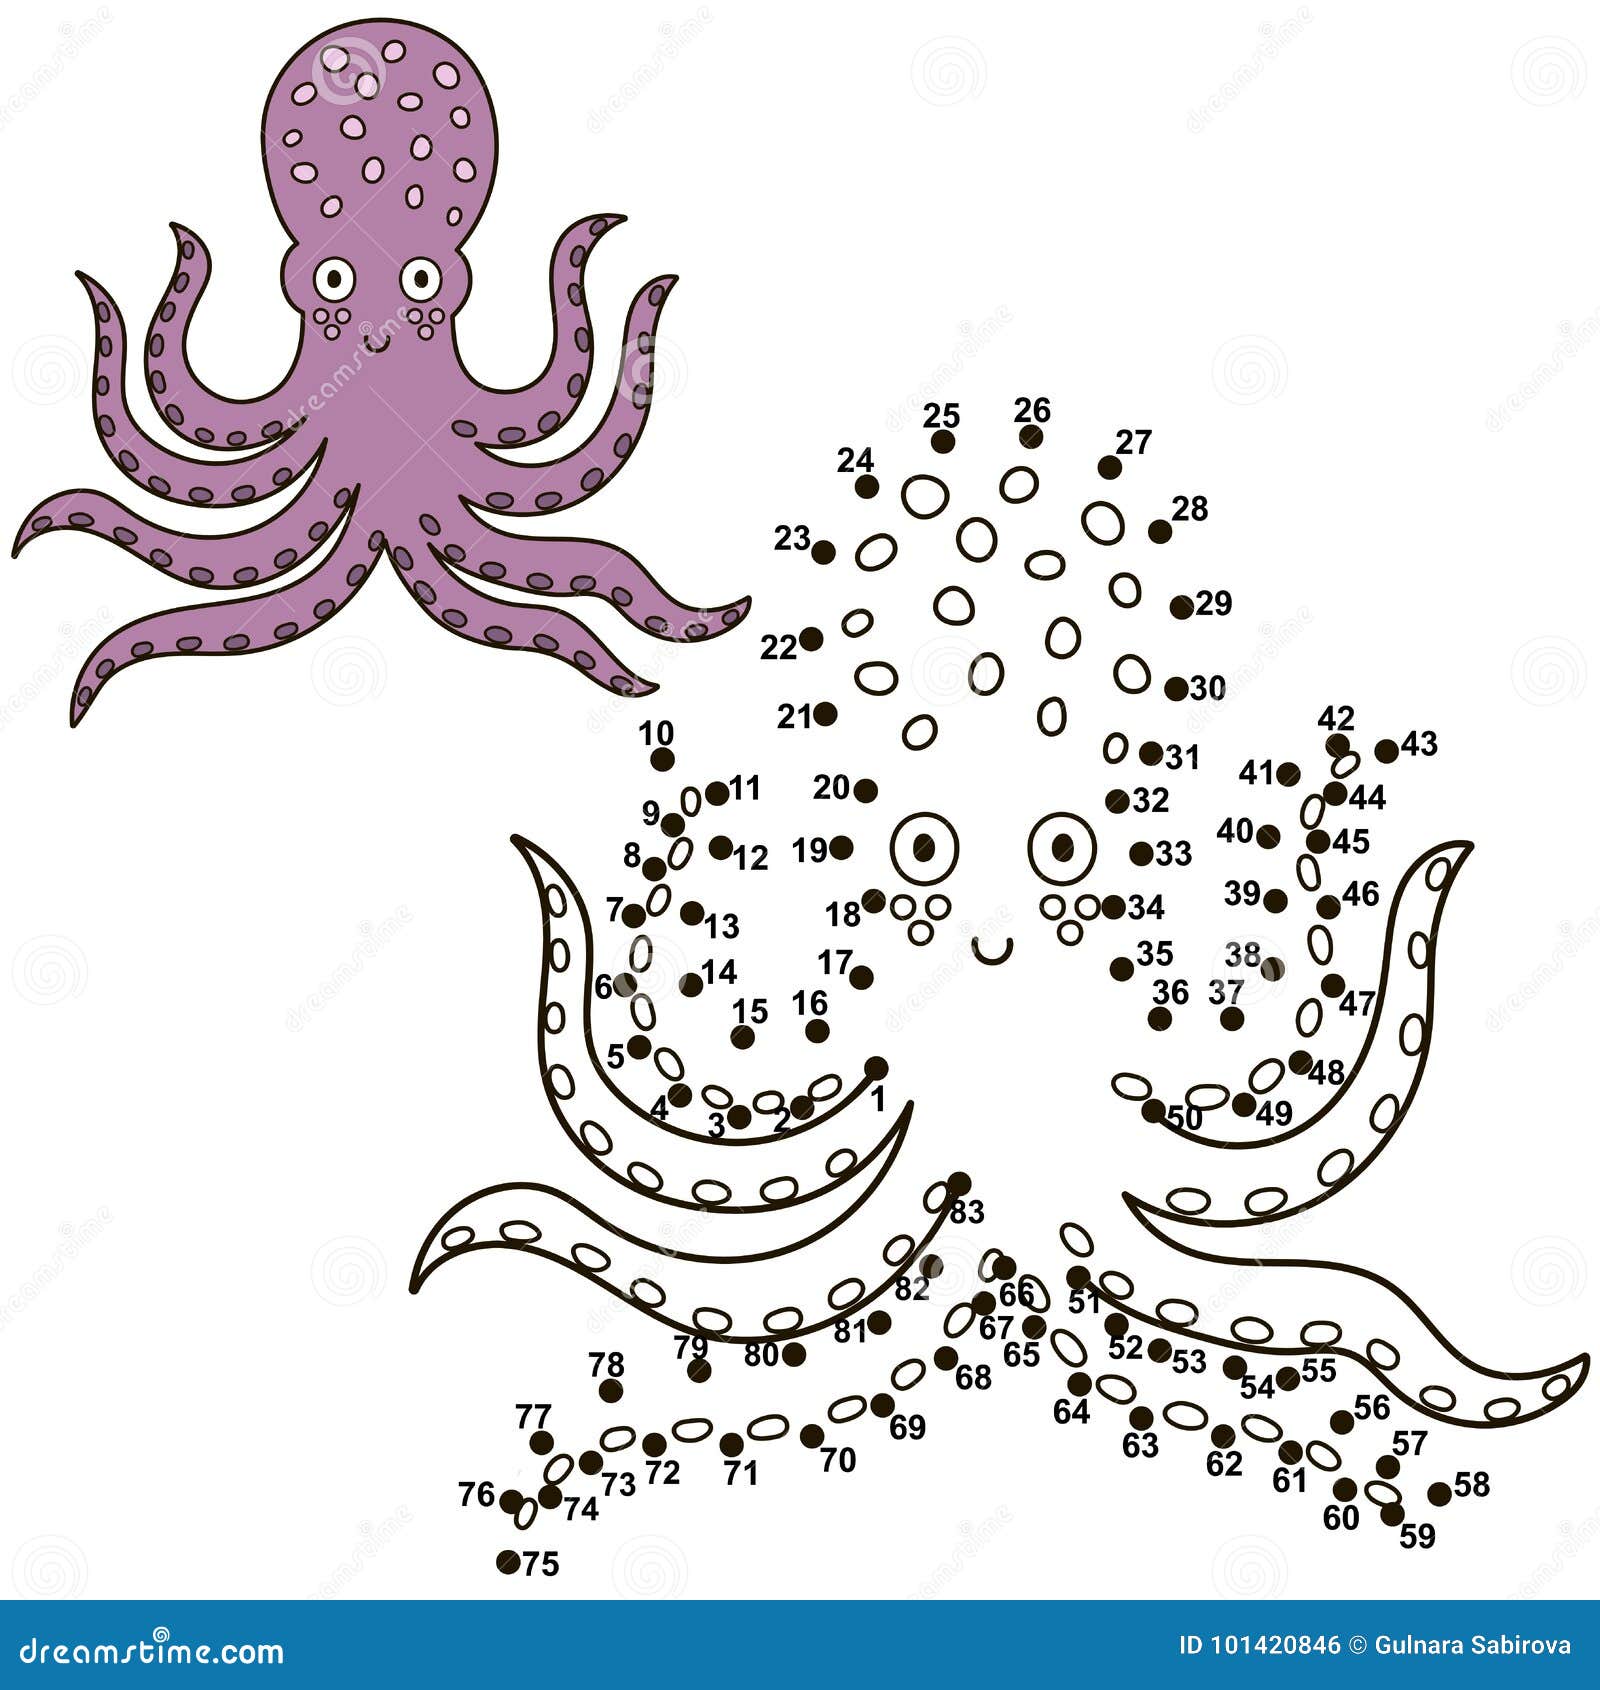 connect the dots to draw a cute octopus and color it